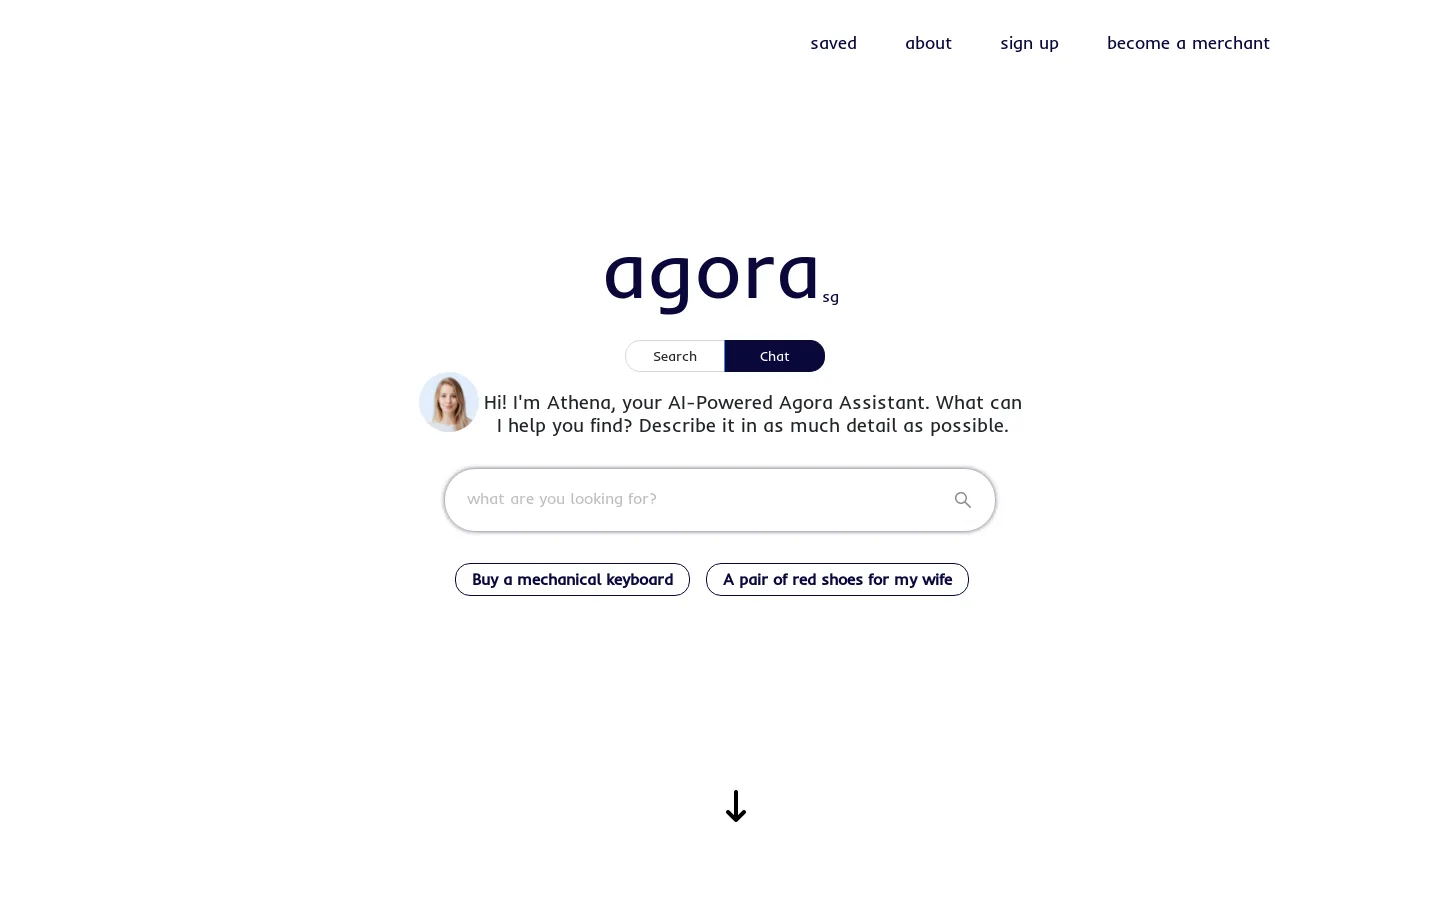 Agora | The Search Engine for E-Commerce Products